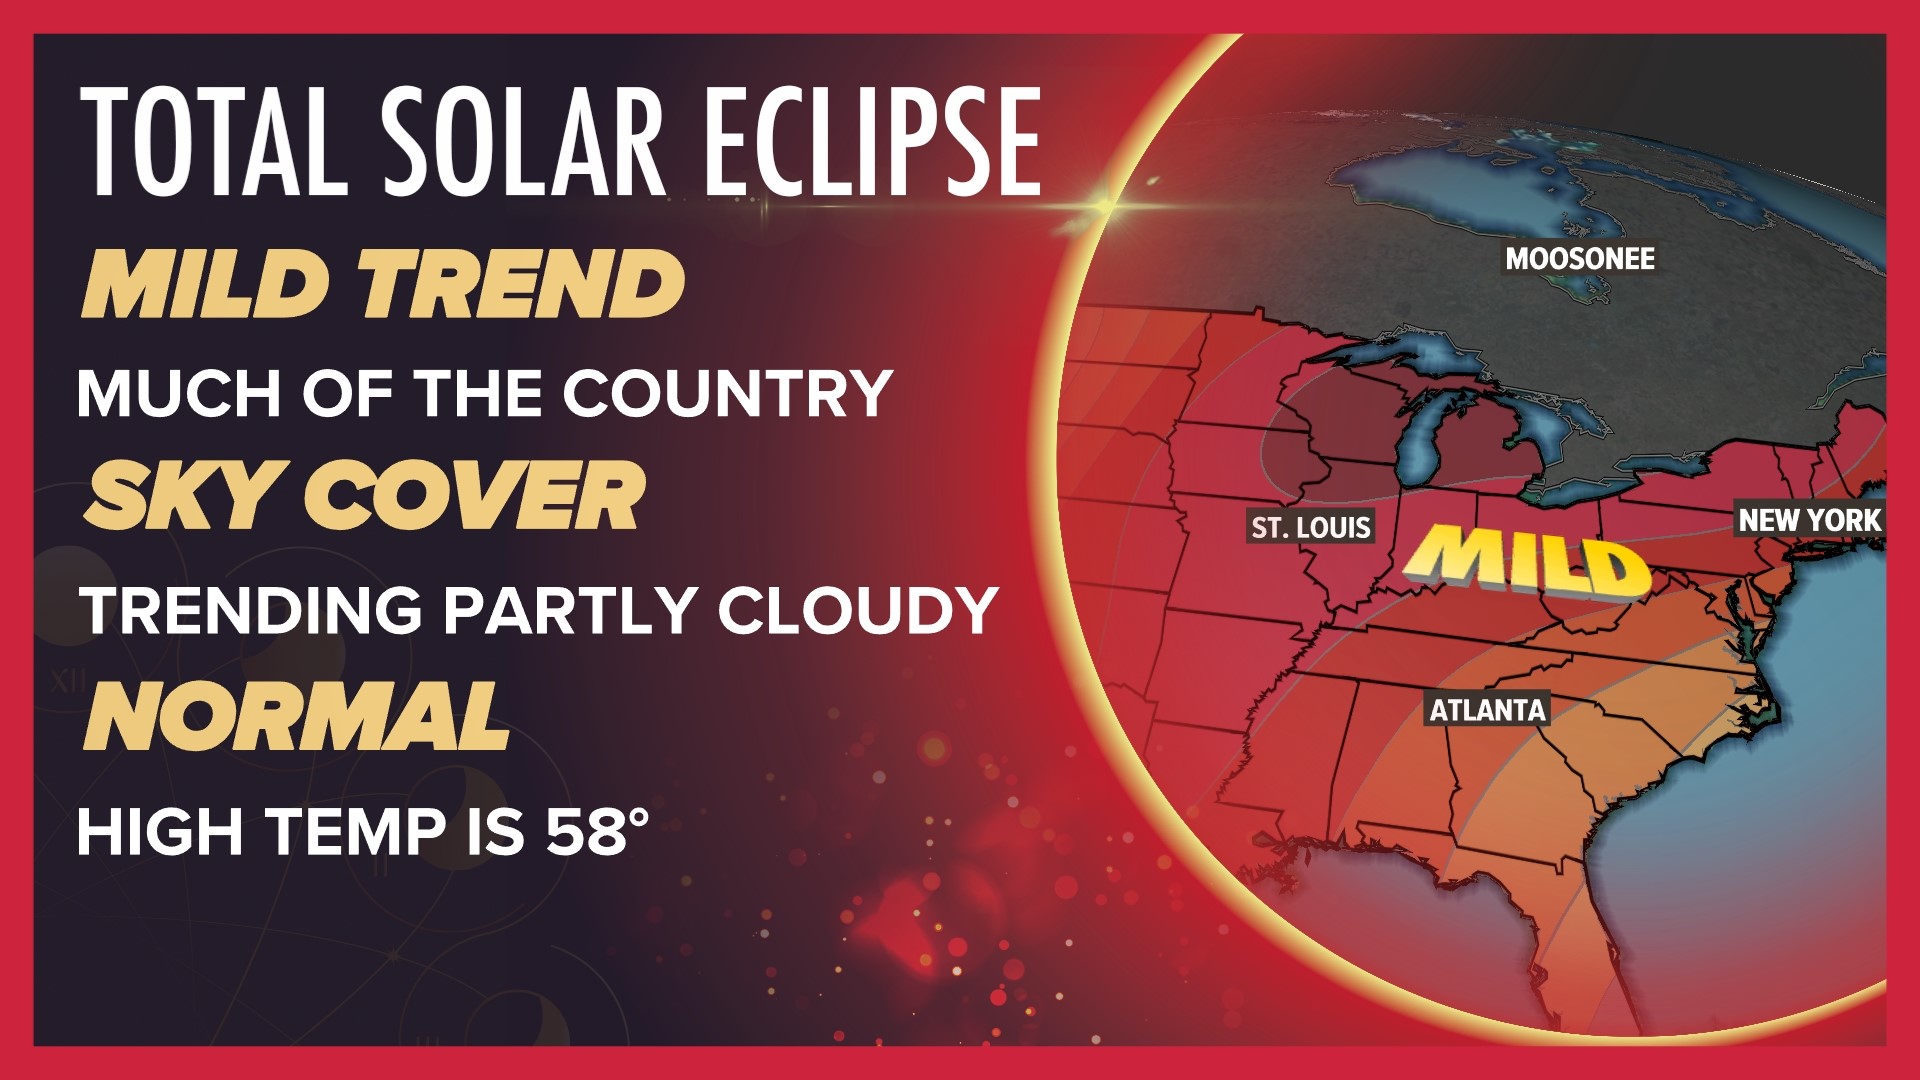 The April 8 total solar eclipse is now in the WTOL 11 10-day forecast. Conditions are trending much milder than average with highs likely in the upper 60s.